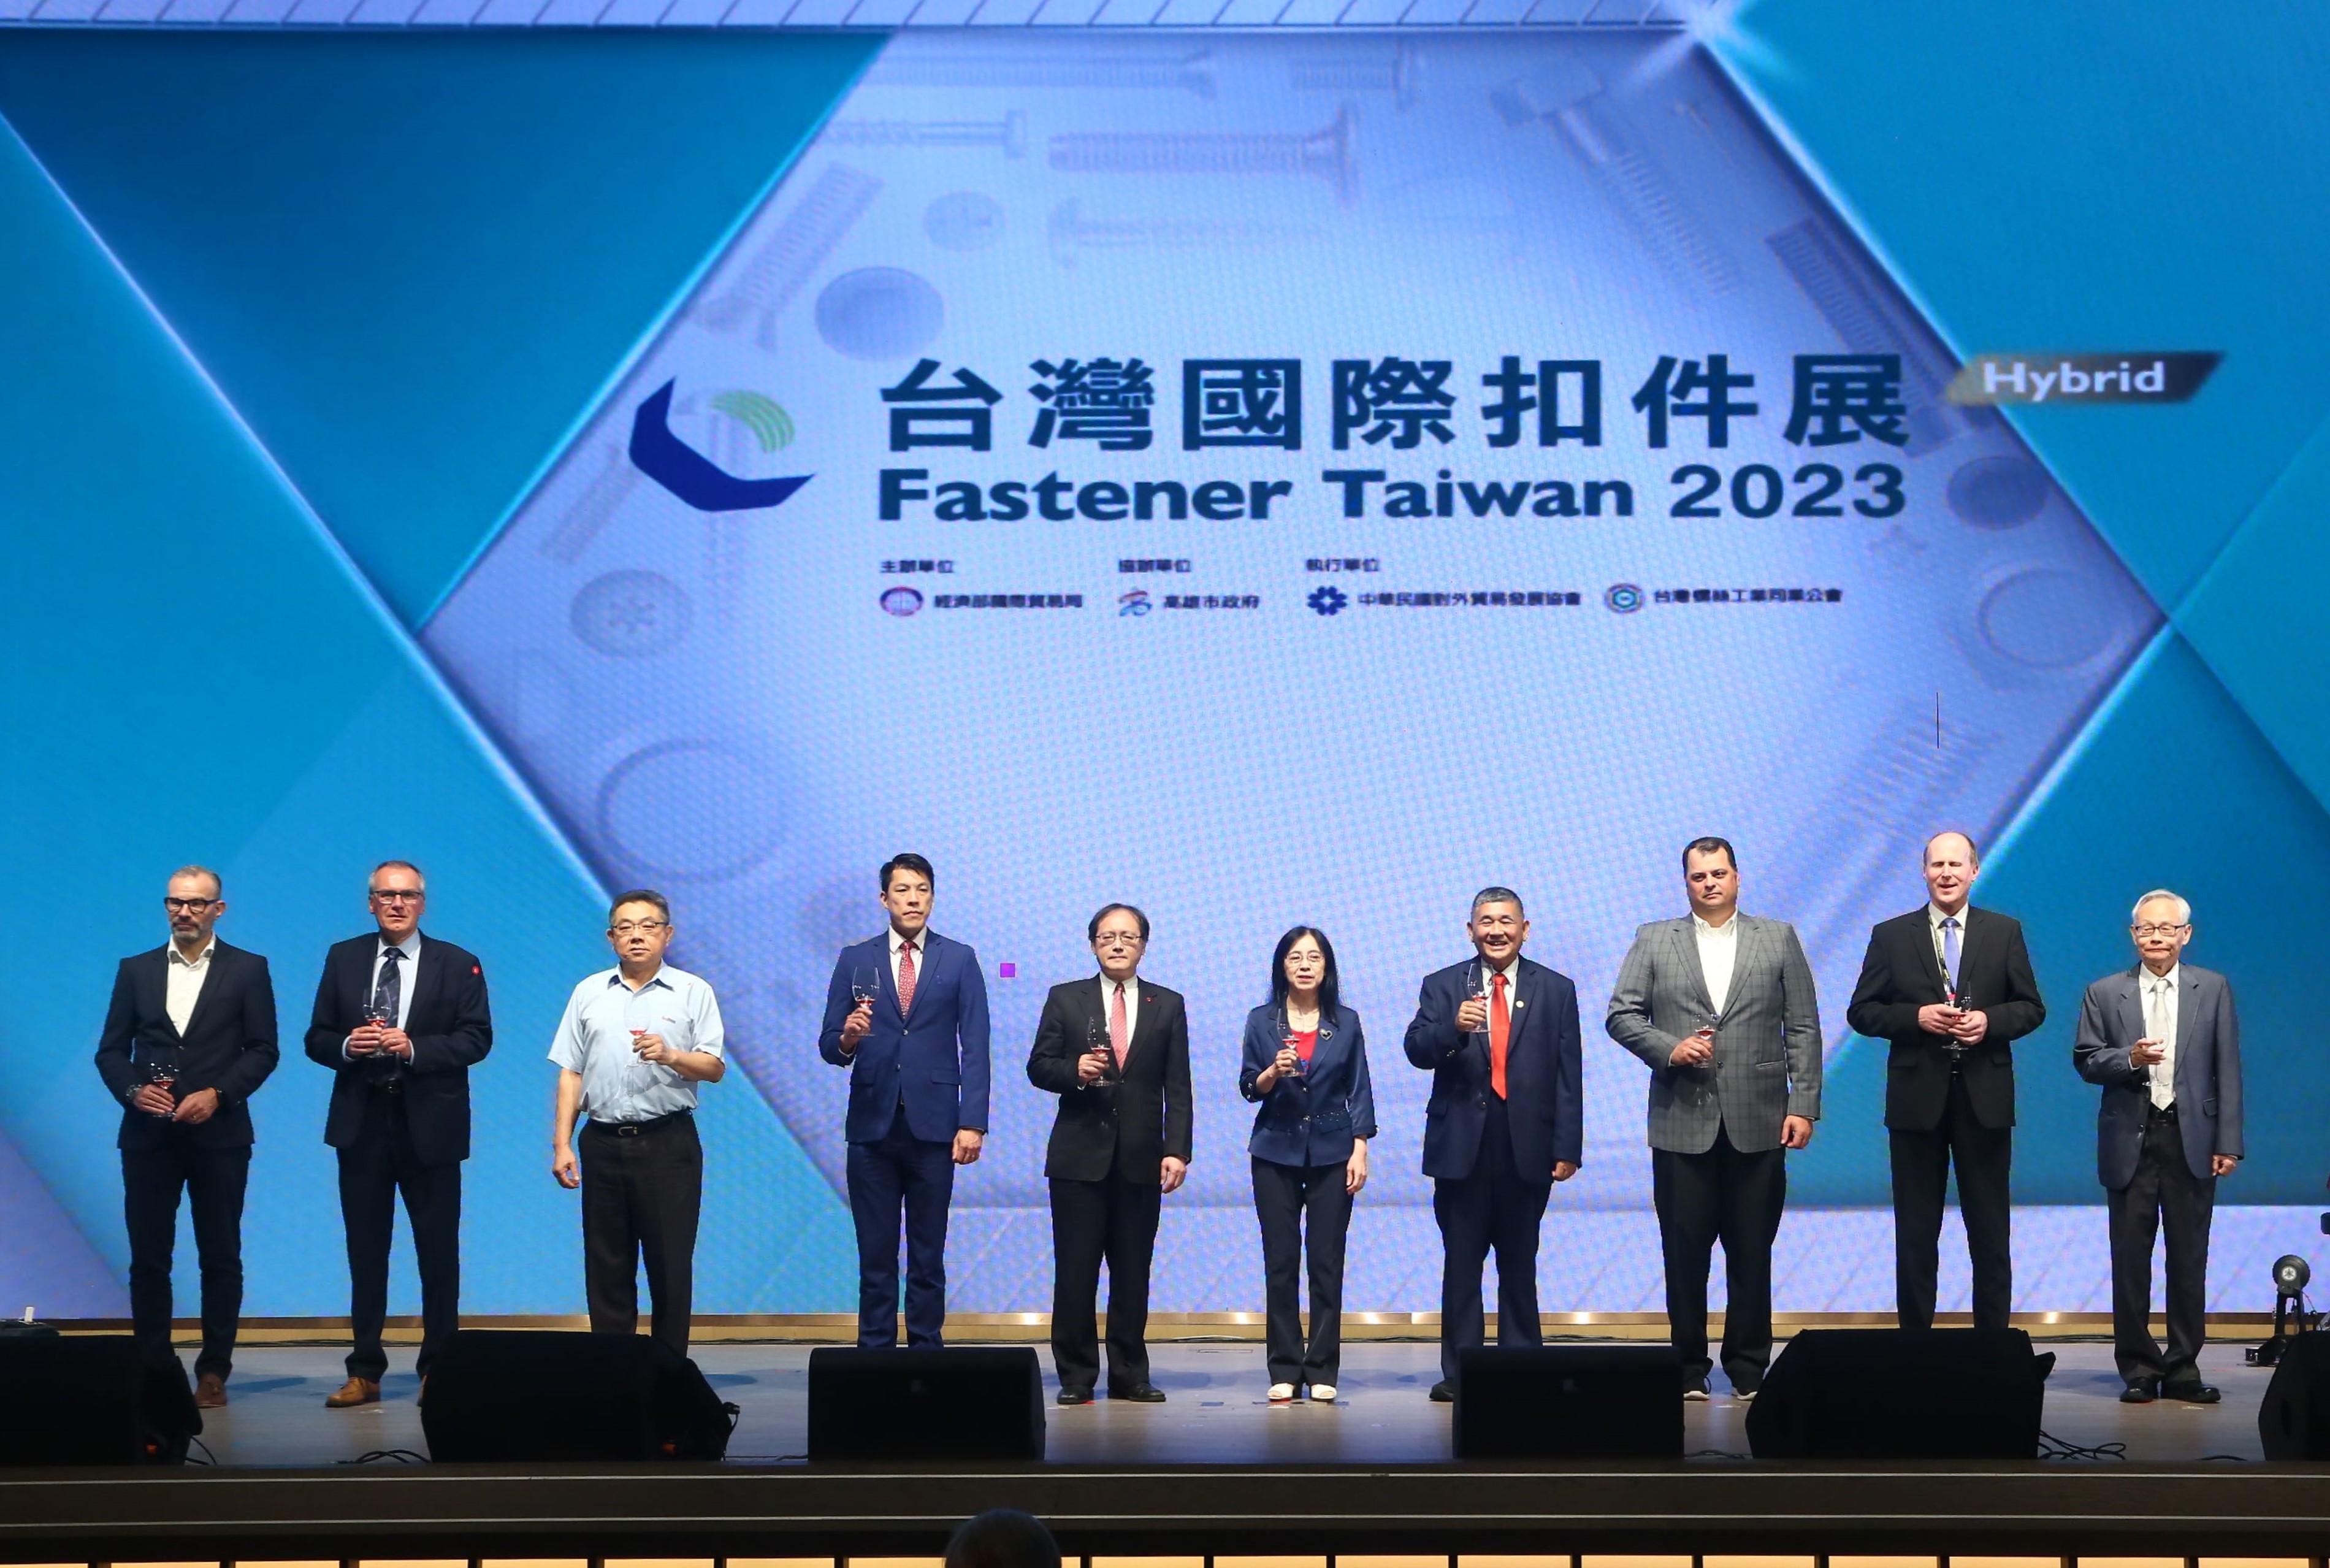 Opening Ceremony and Reunion Gala Dinner for Fastener Taiwan 2023